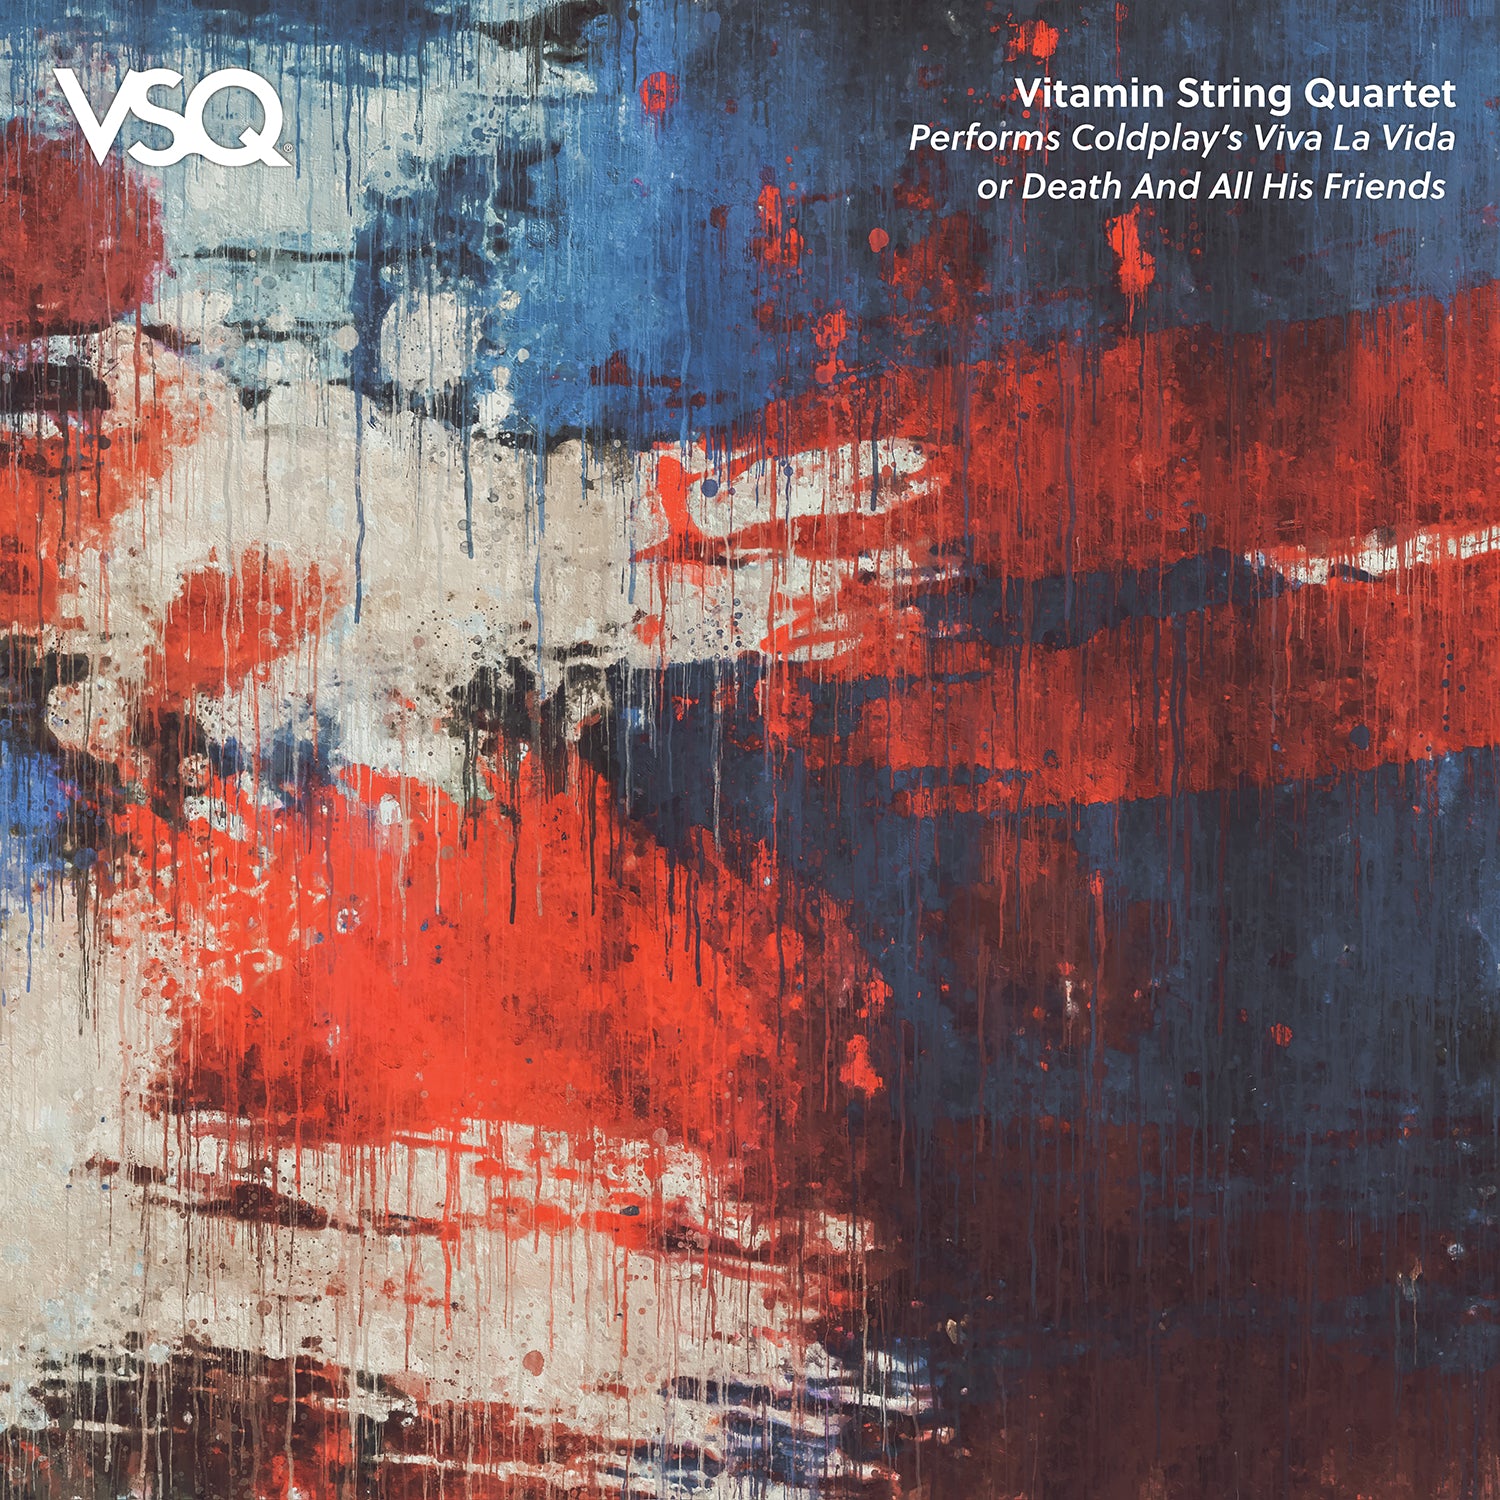 red and blue abstract album art for coldplay's viva la vida cover by Vitamin String Quartet